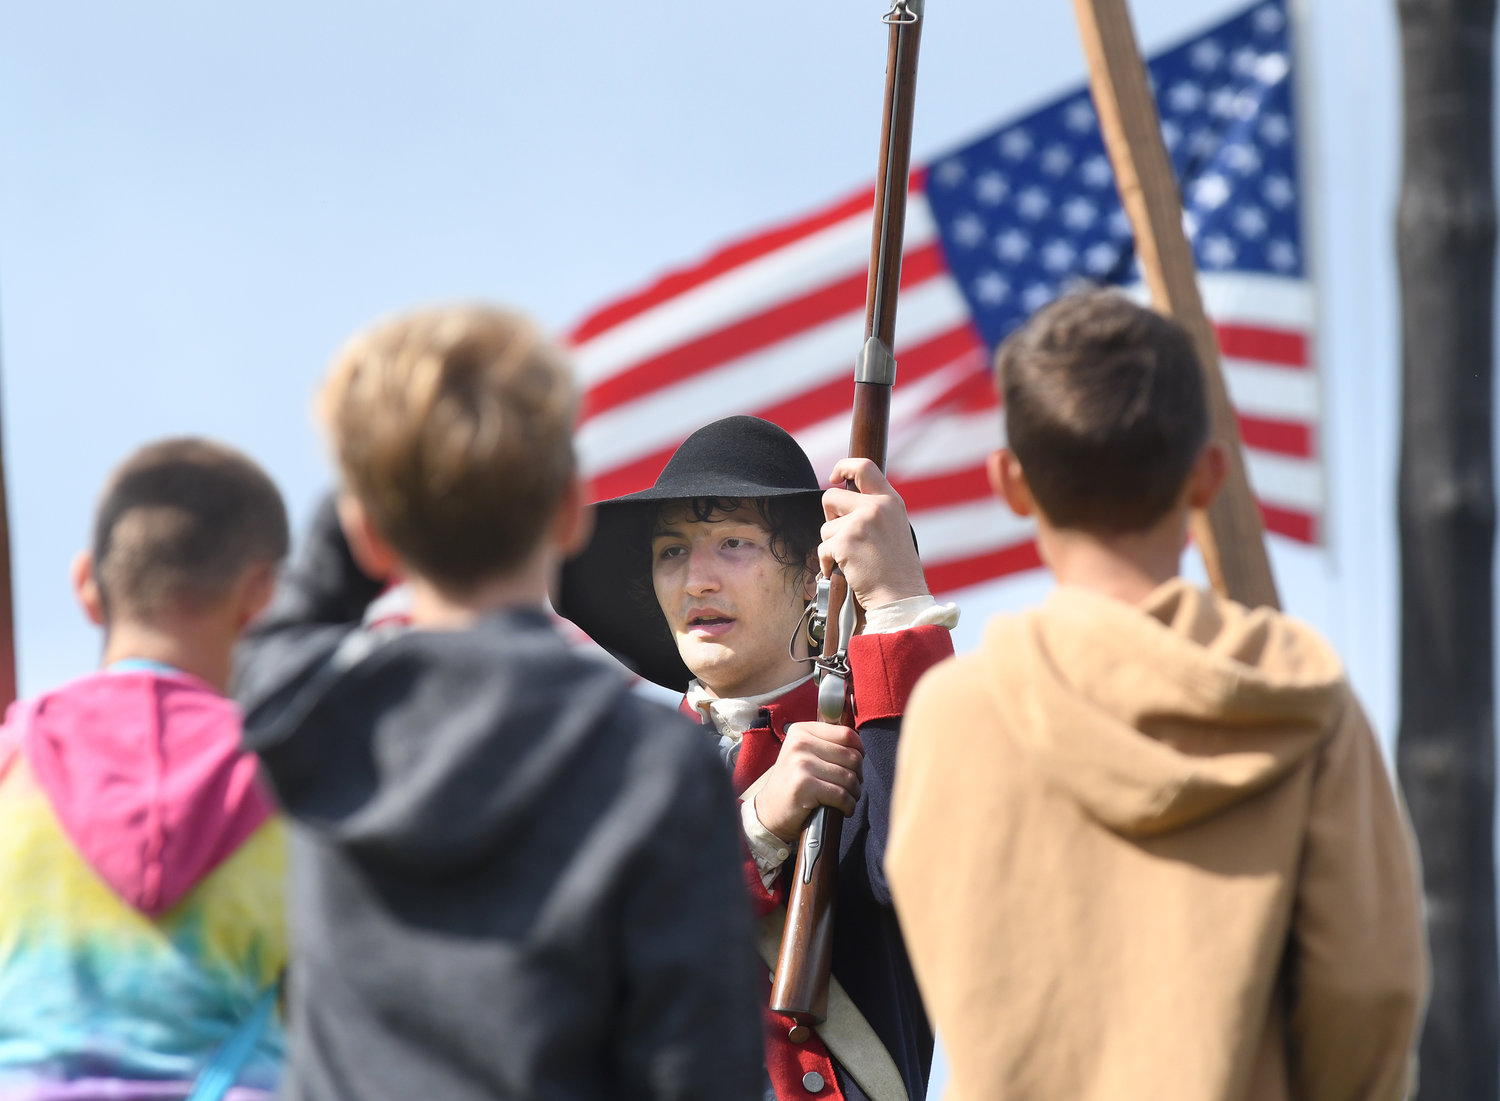 3rd NY Regiment Private Elijah Braun leads a group of home schooled children through a demonstration of the workings of a musket Wednesday at Fort Stanwix in Rome.